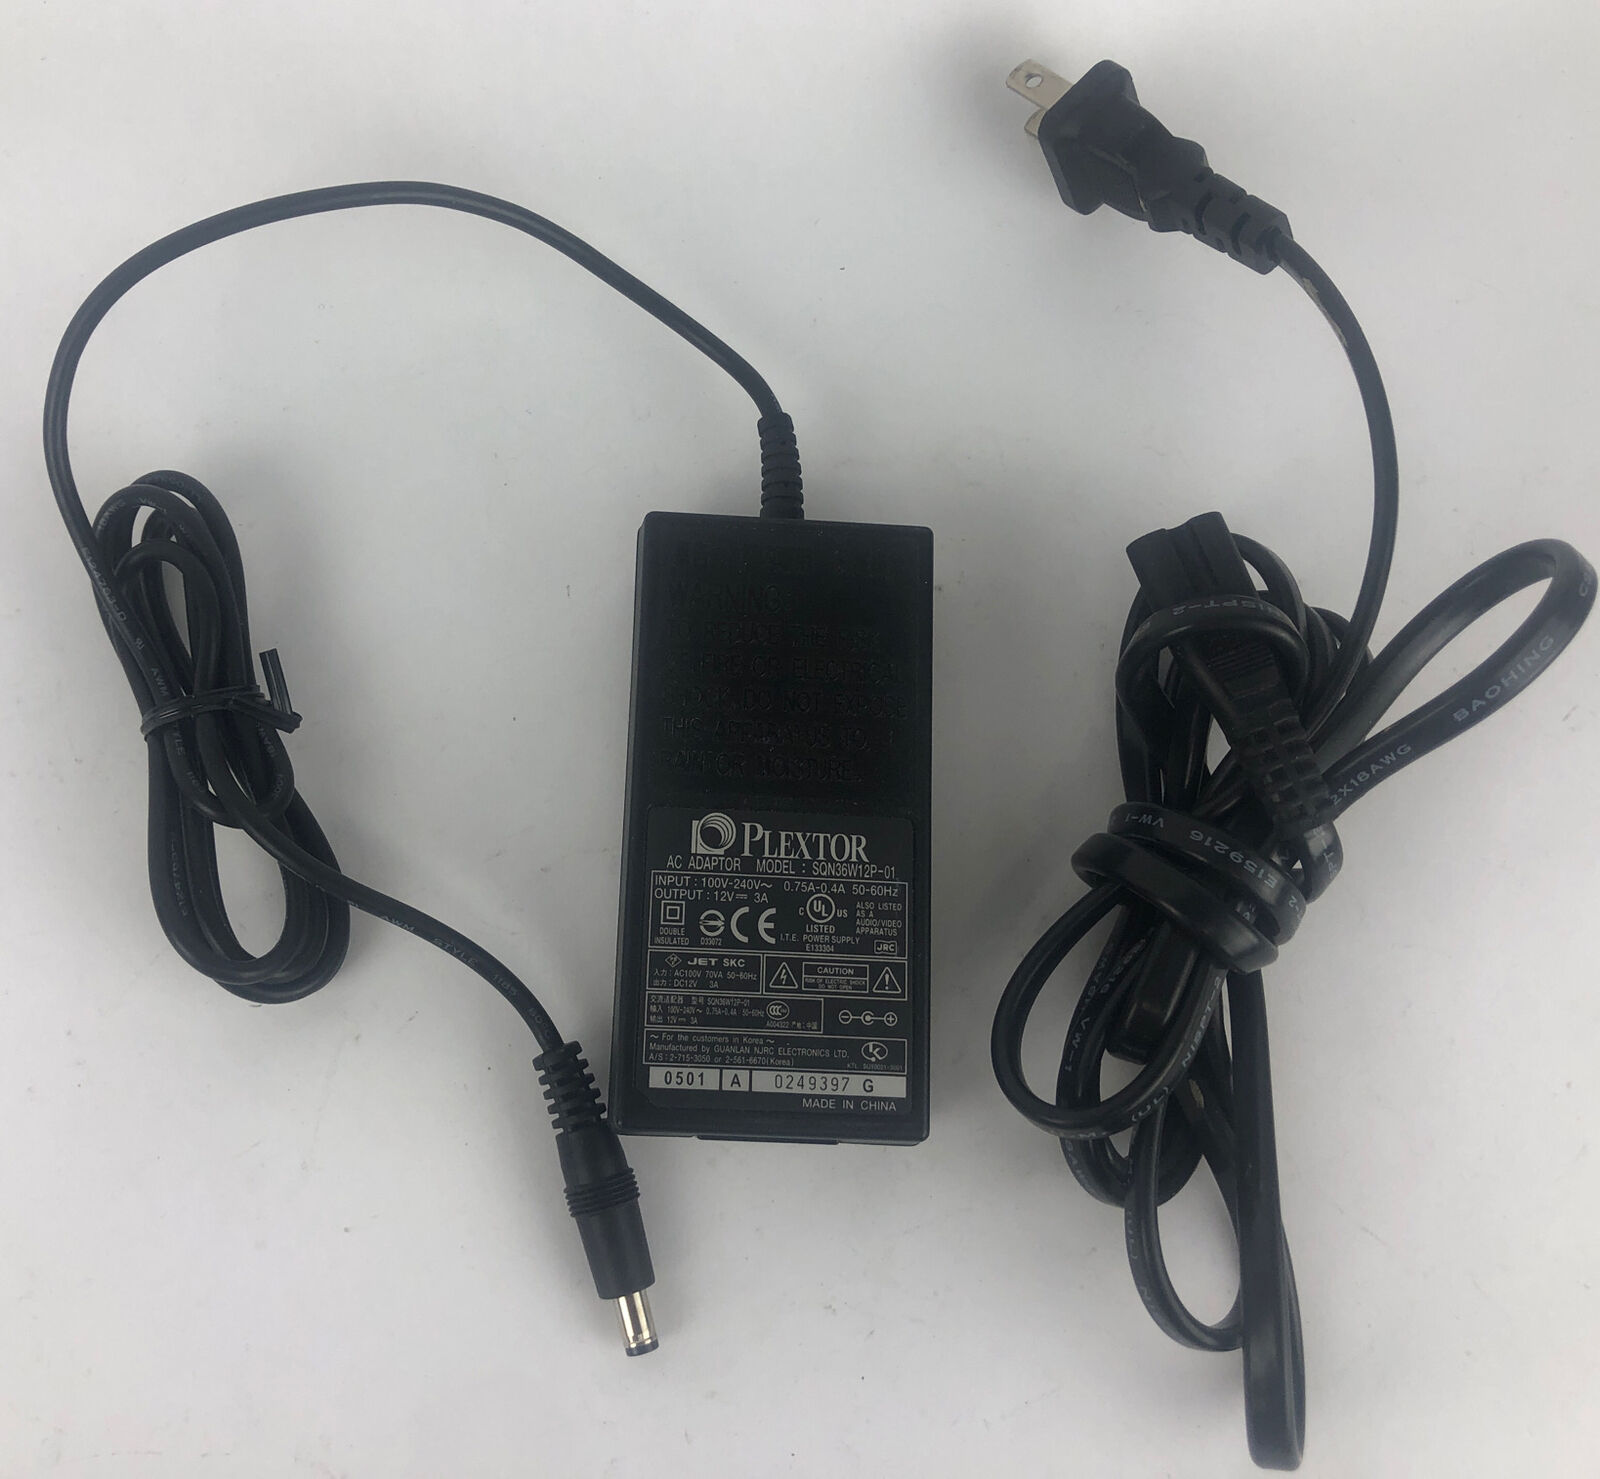 AC ADAPTER RideOnTruckCar Toy3SpeedsLedLights RemoteControl Aux Foot Pedal Multi Type: AC/DC Adapter Compatible Mode